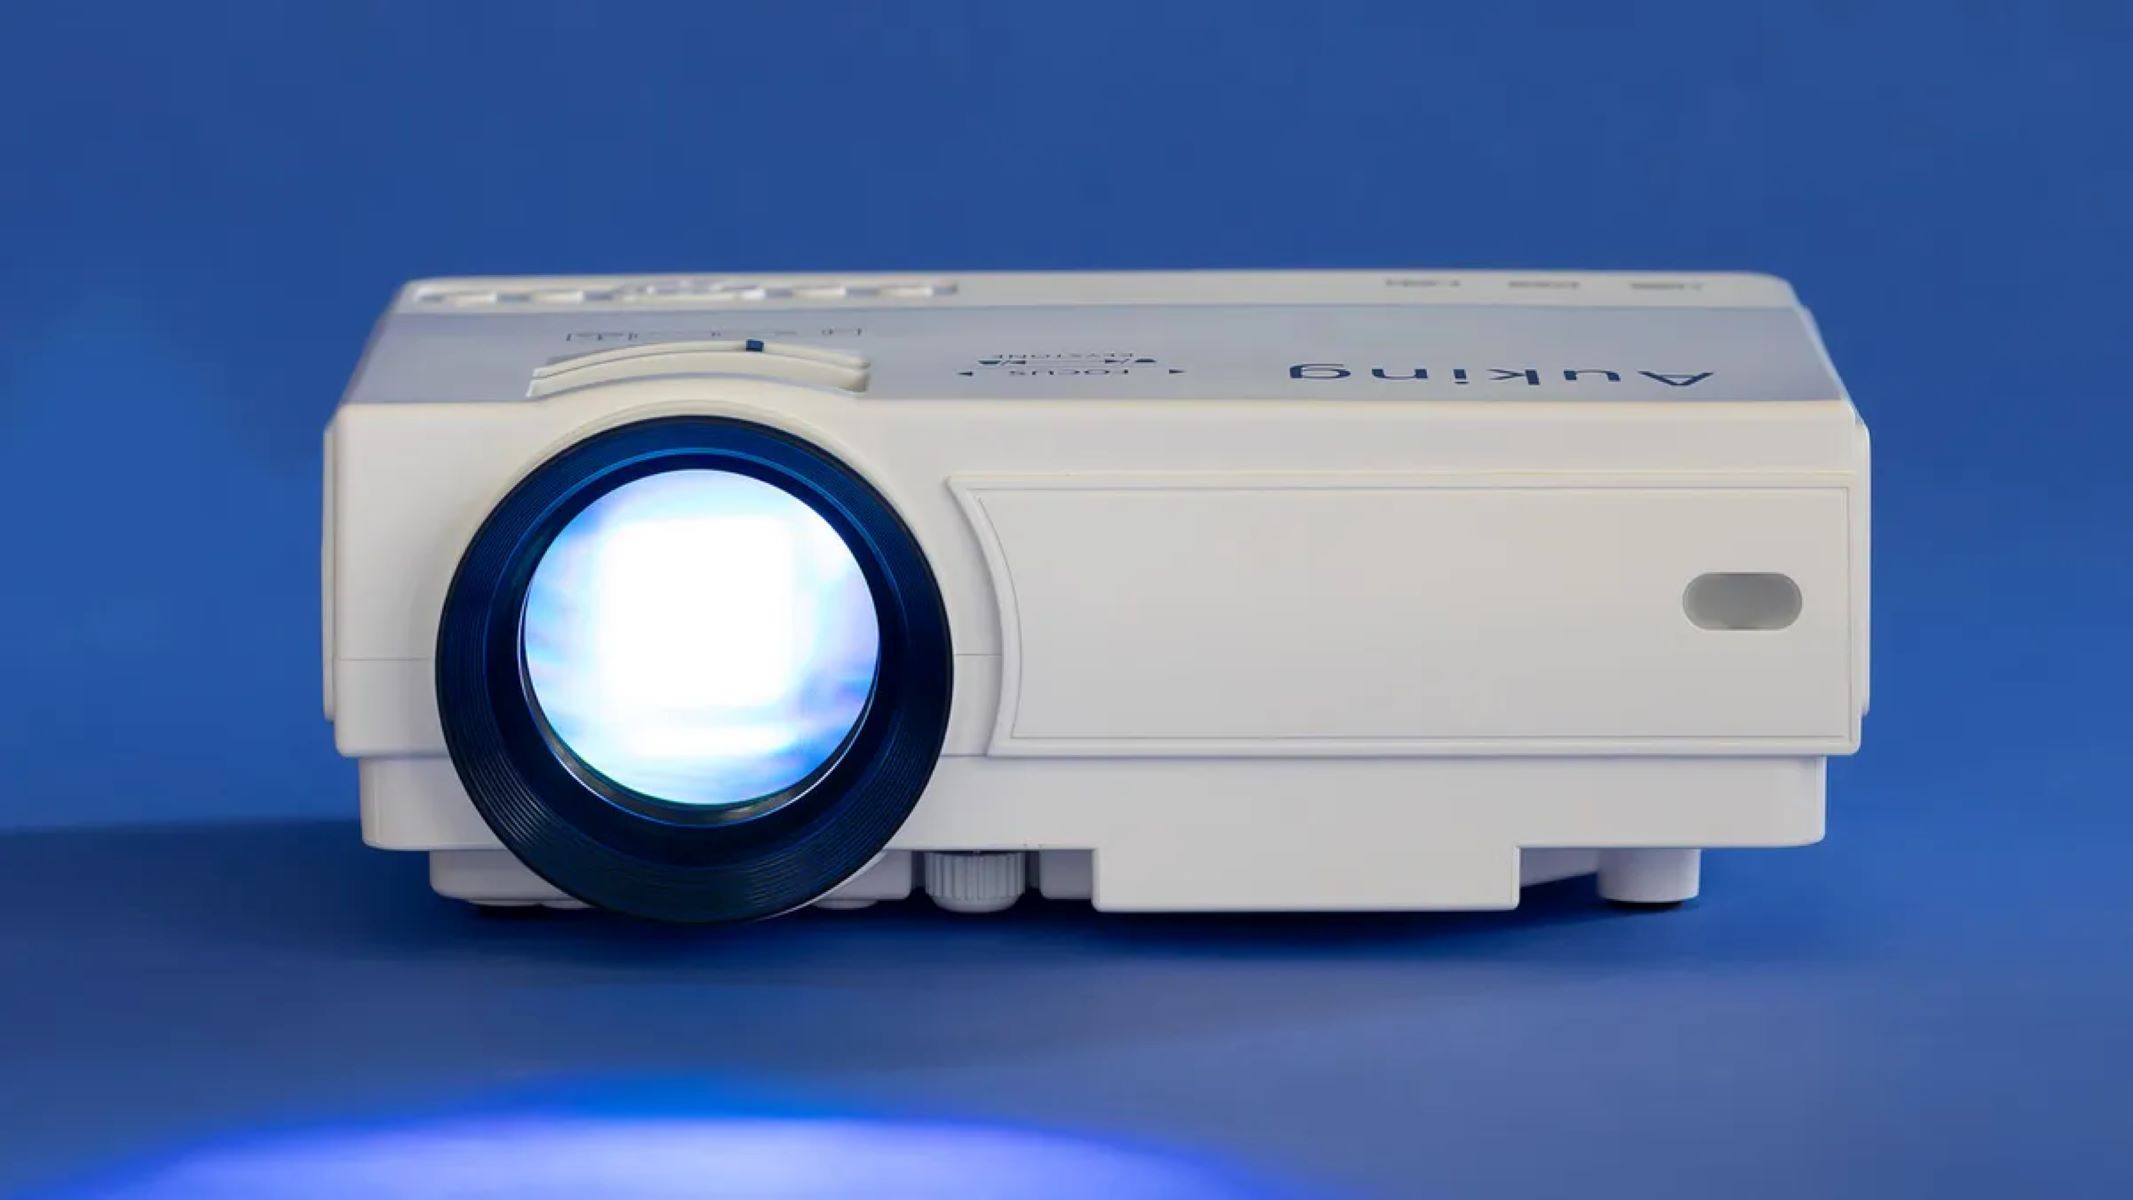 Connecting Auking Projector To IPhone: Step-by-Step Guide